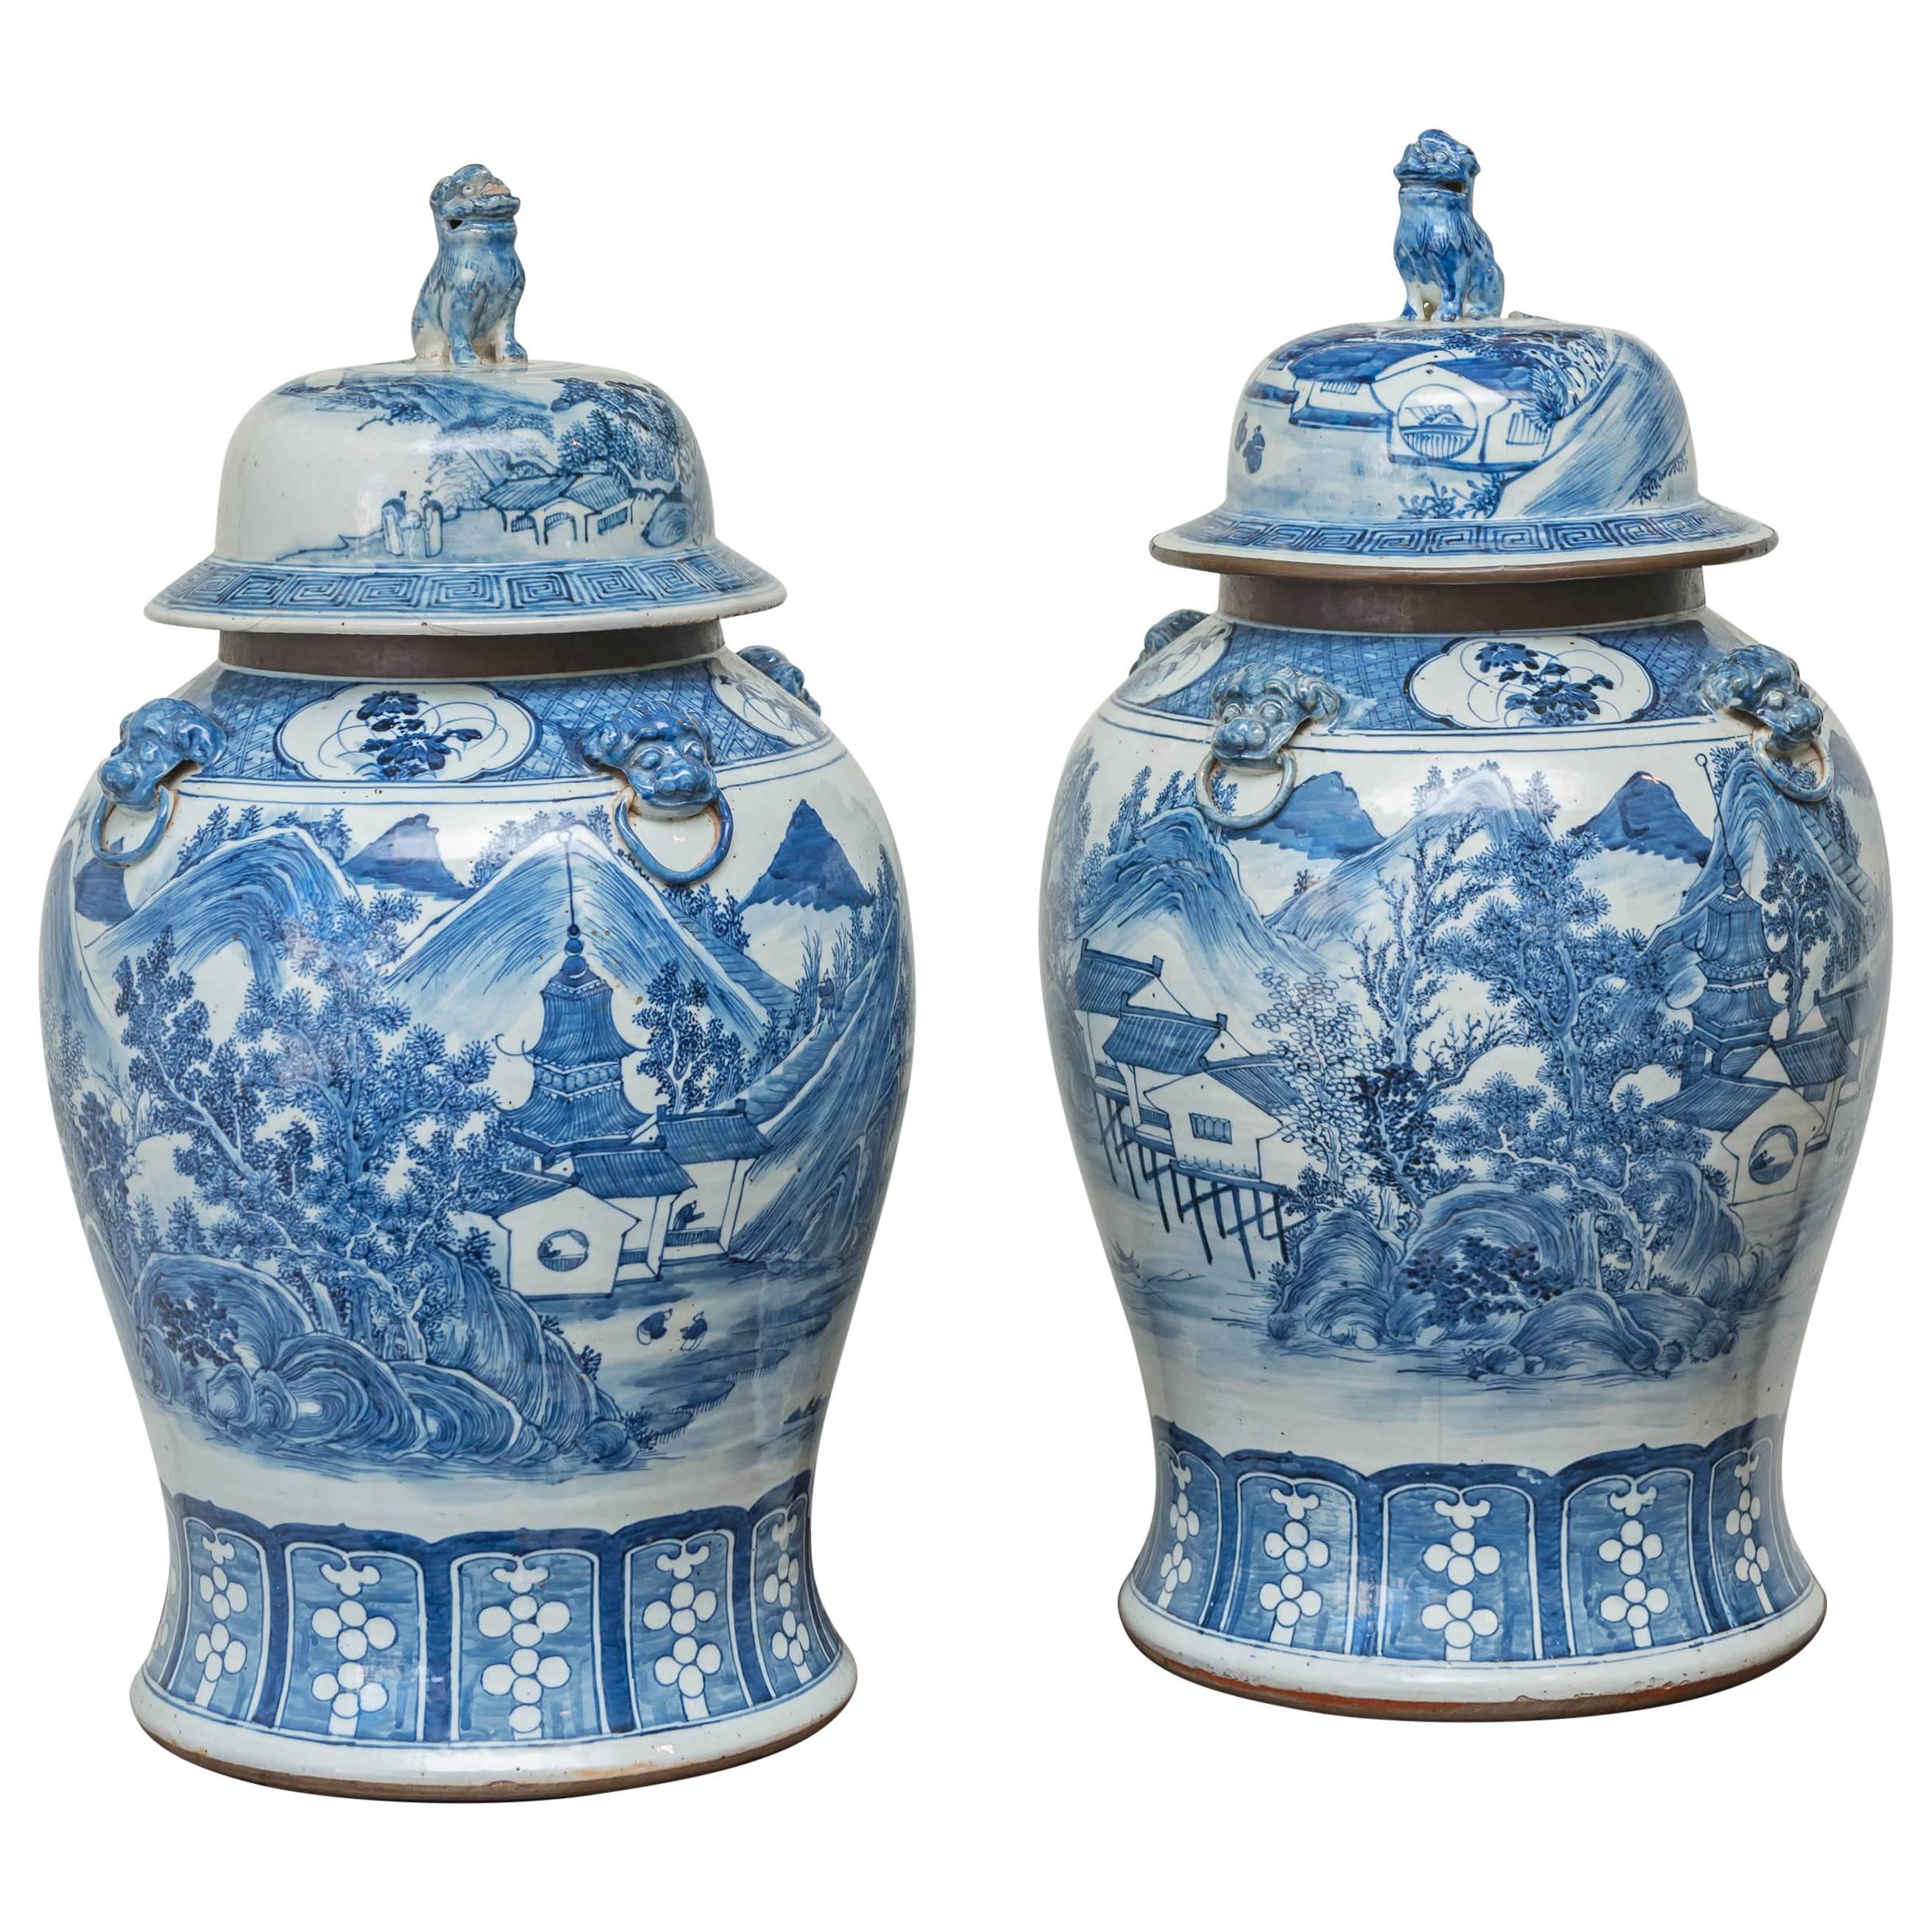 Pair of 19th Century Chinese Blue and White Porcelain Cap Jars, circa 1825 For Sale